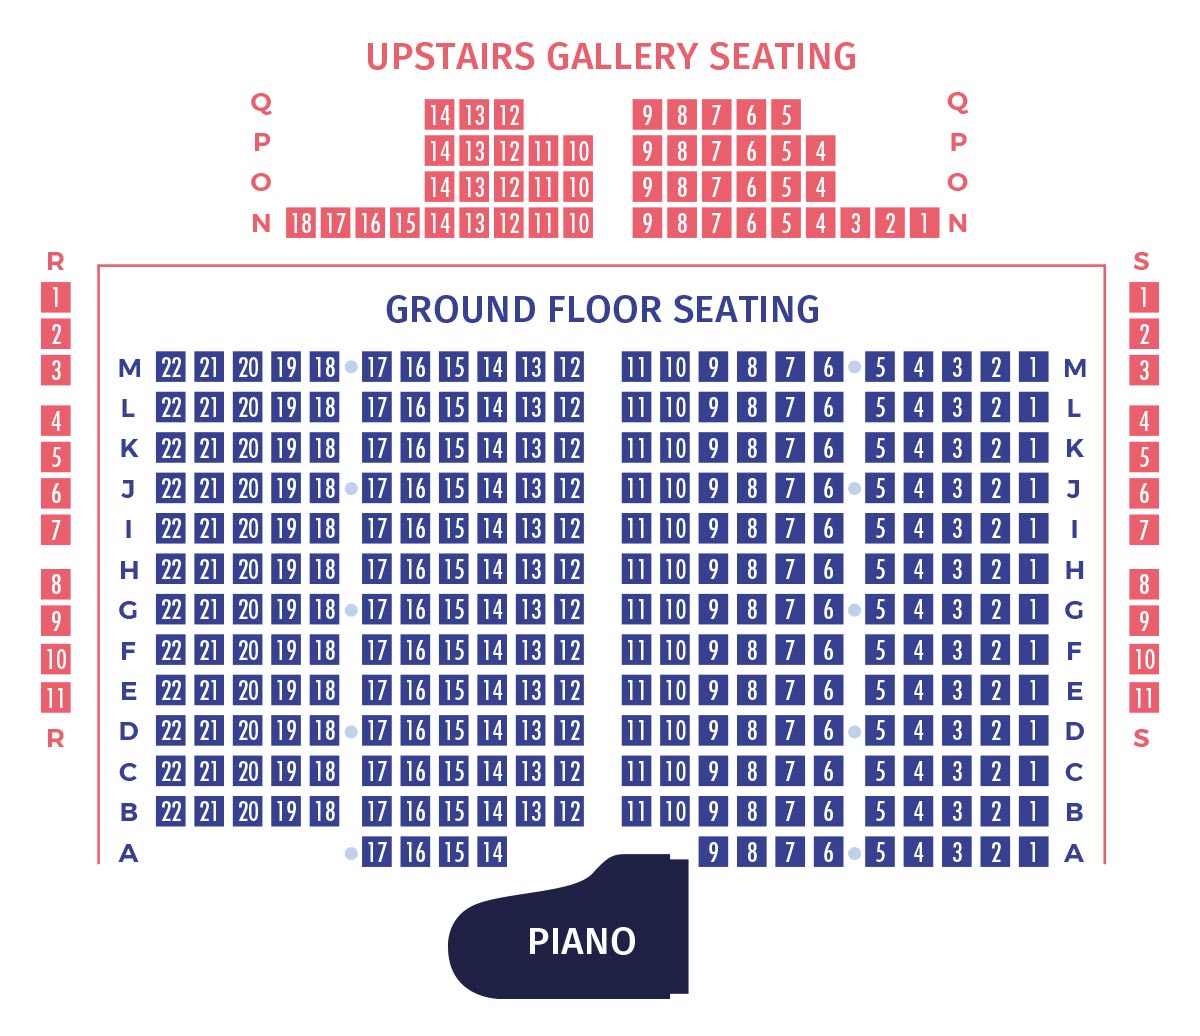 New Ross Piano Festival 2018 – St. Mary's Church seating plan